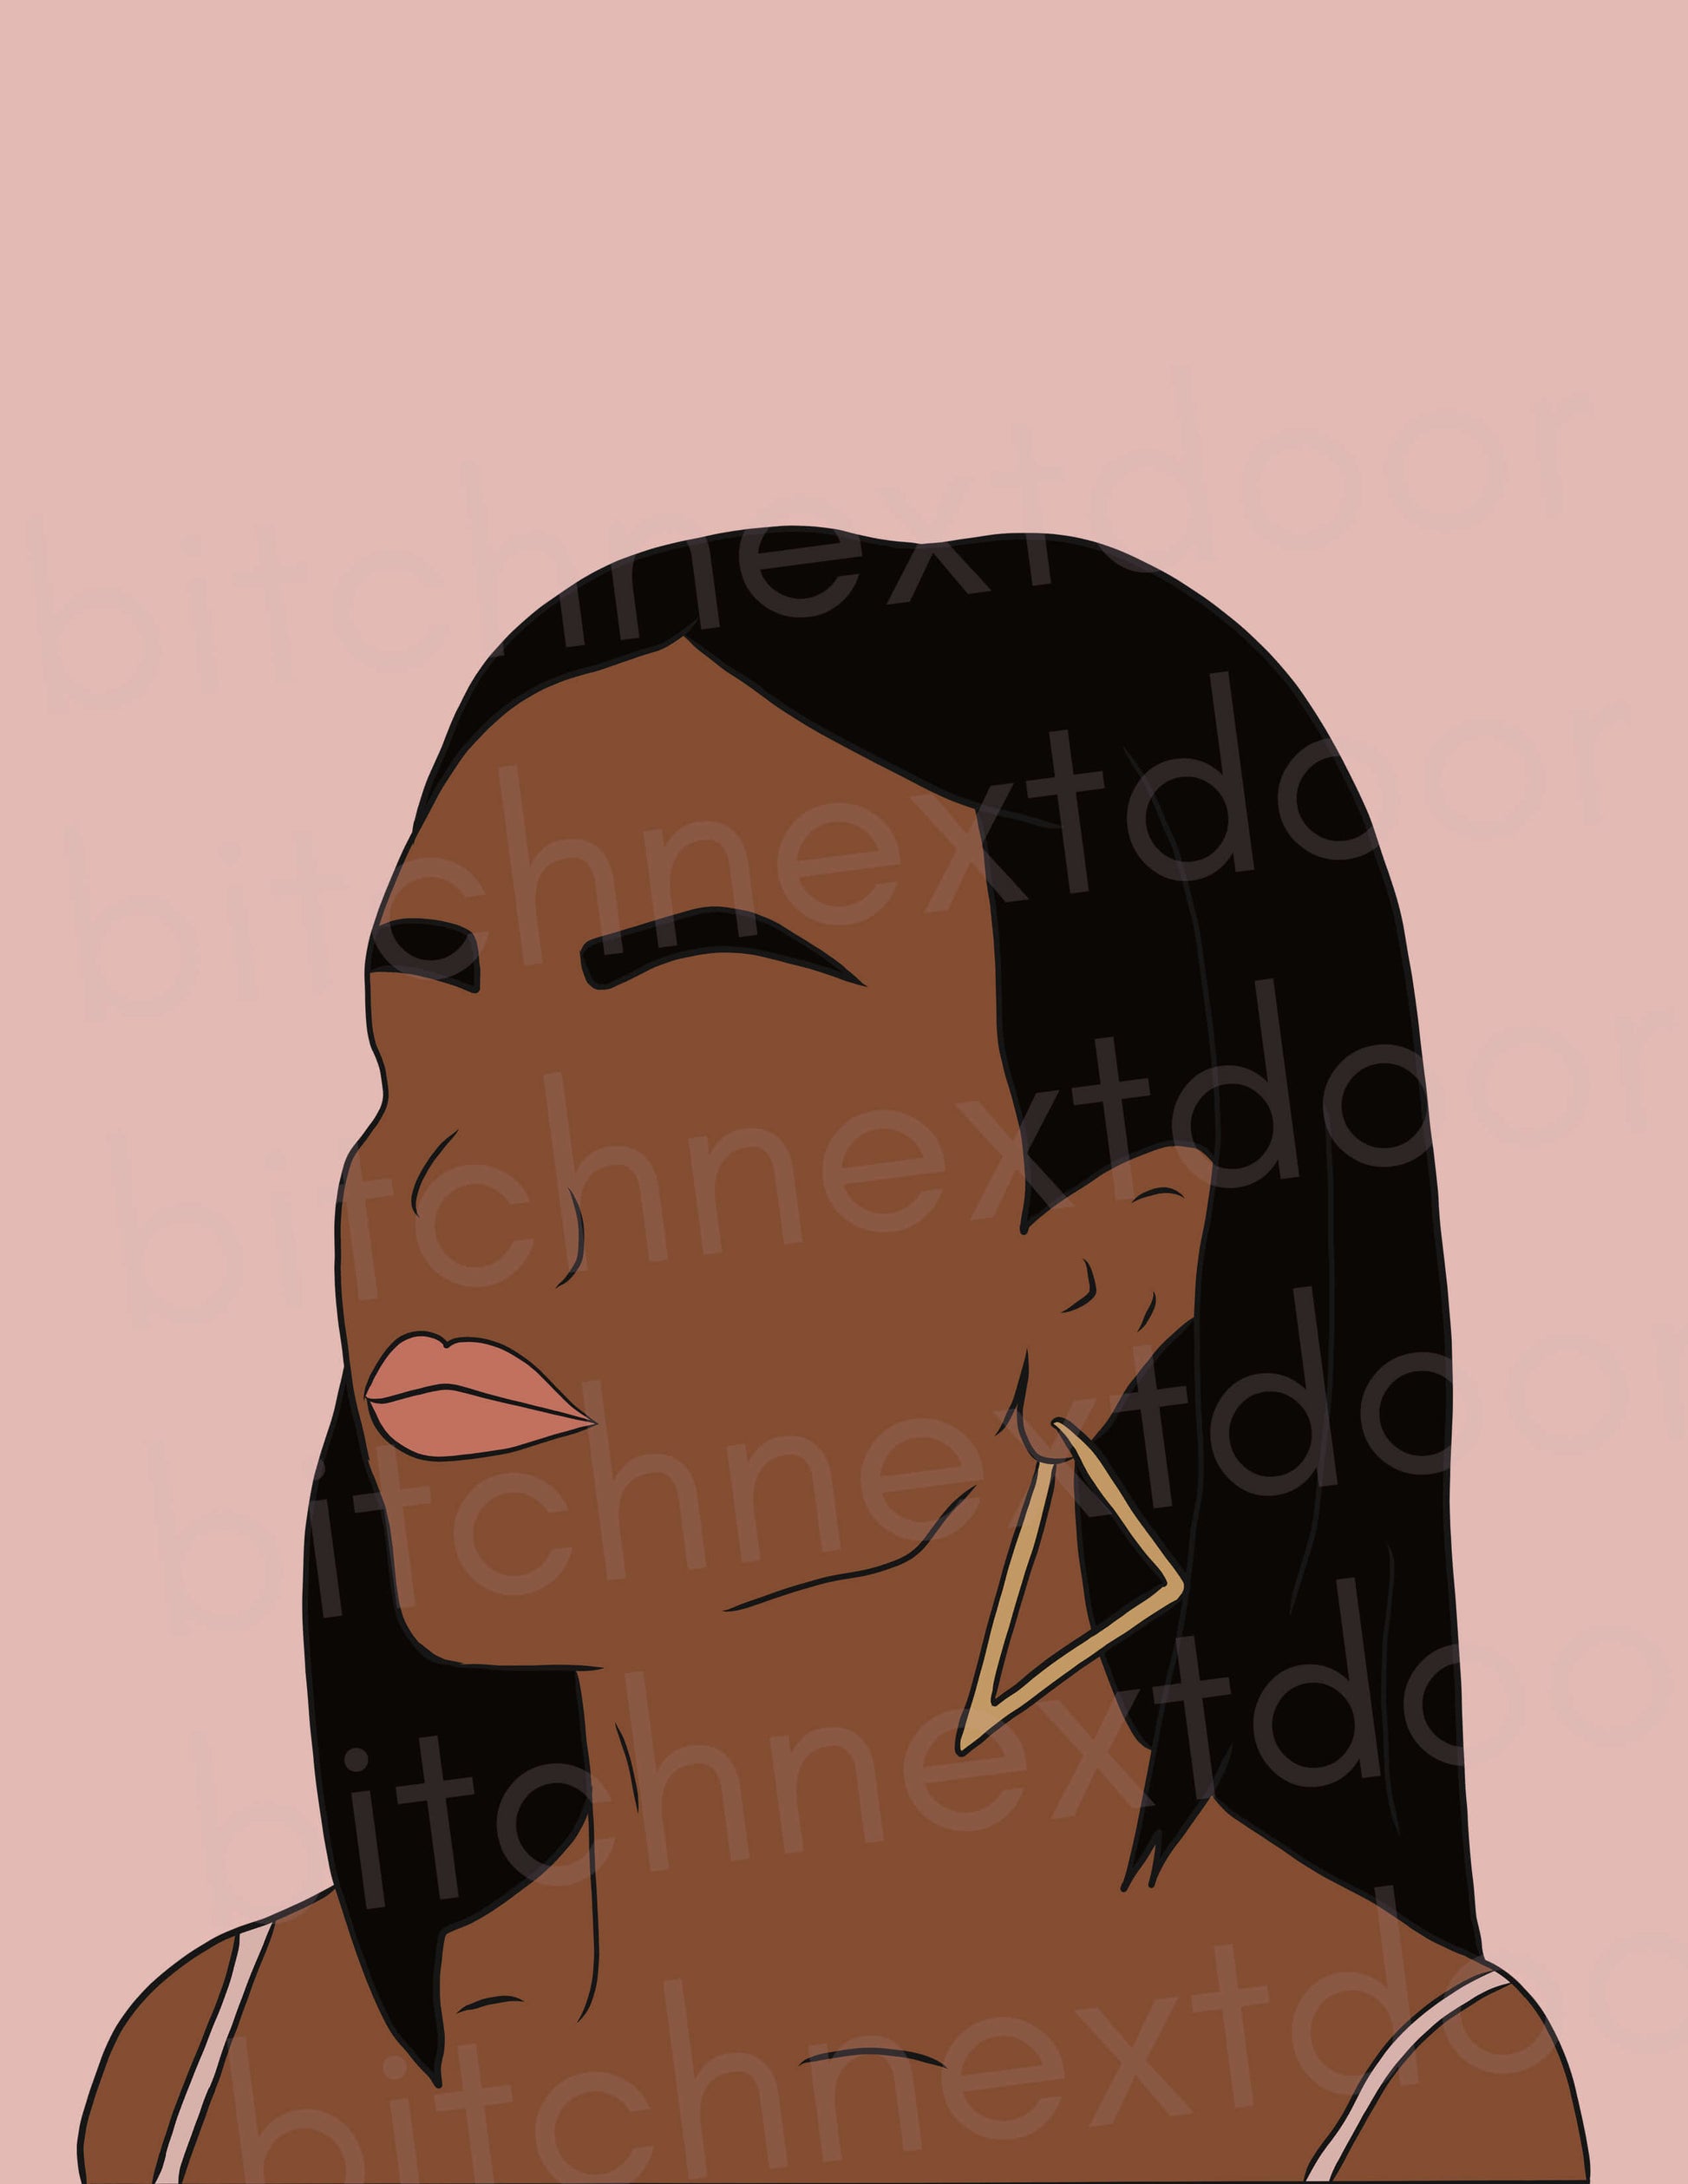 Inspirational digital drawing of michelle obama, available as a hanging art print